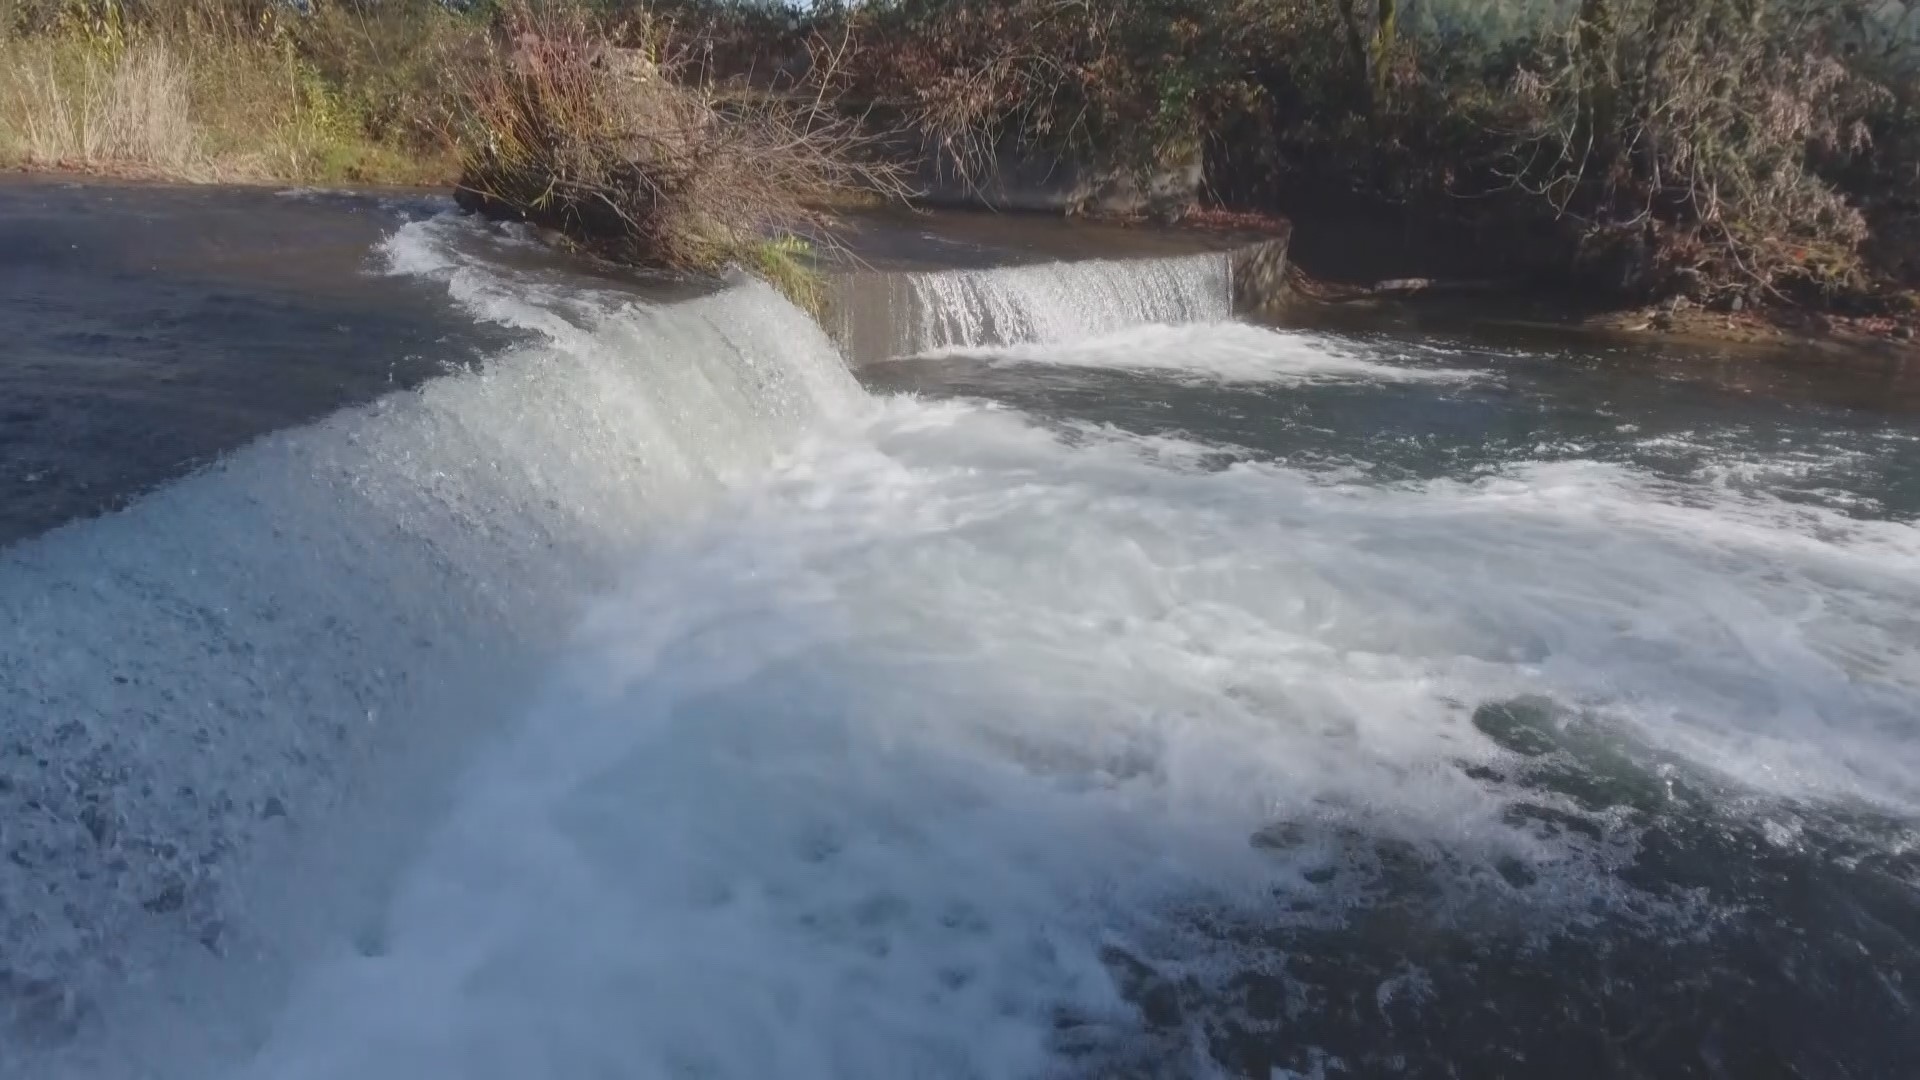 The nearly 100-year-old dam is the number one fish passage barrier in the Tualatin Basin. It's set to be removed this summer.